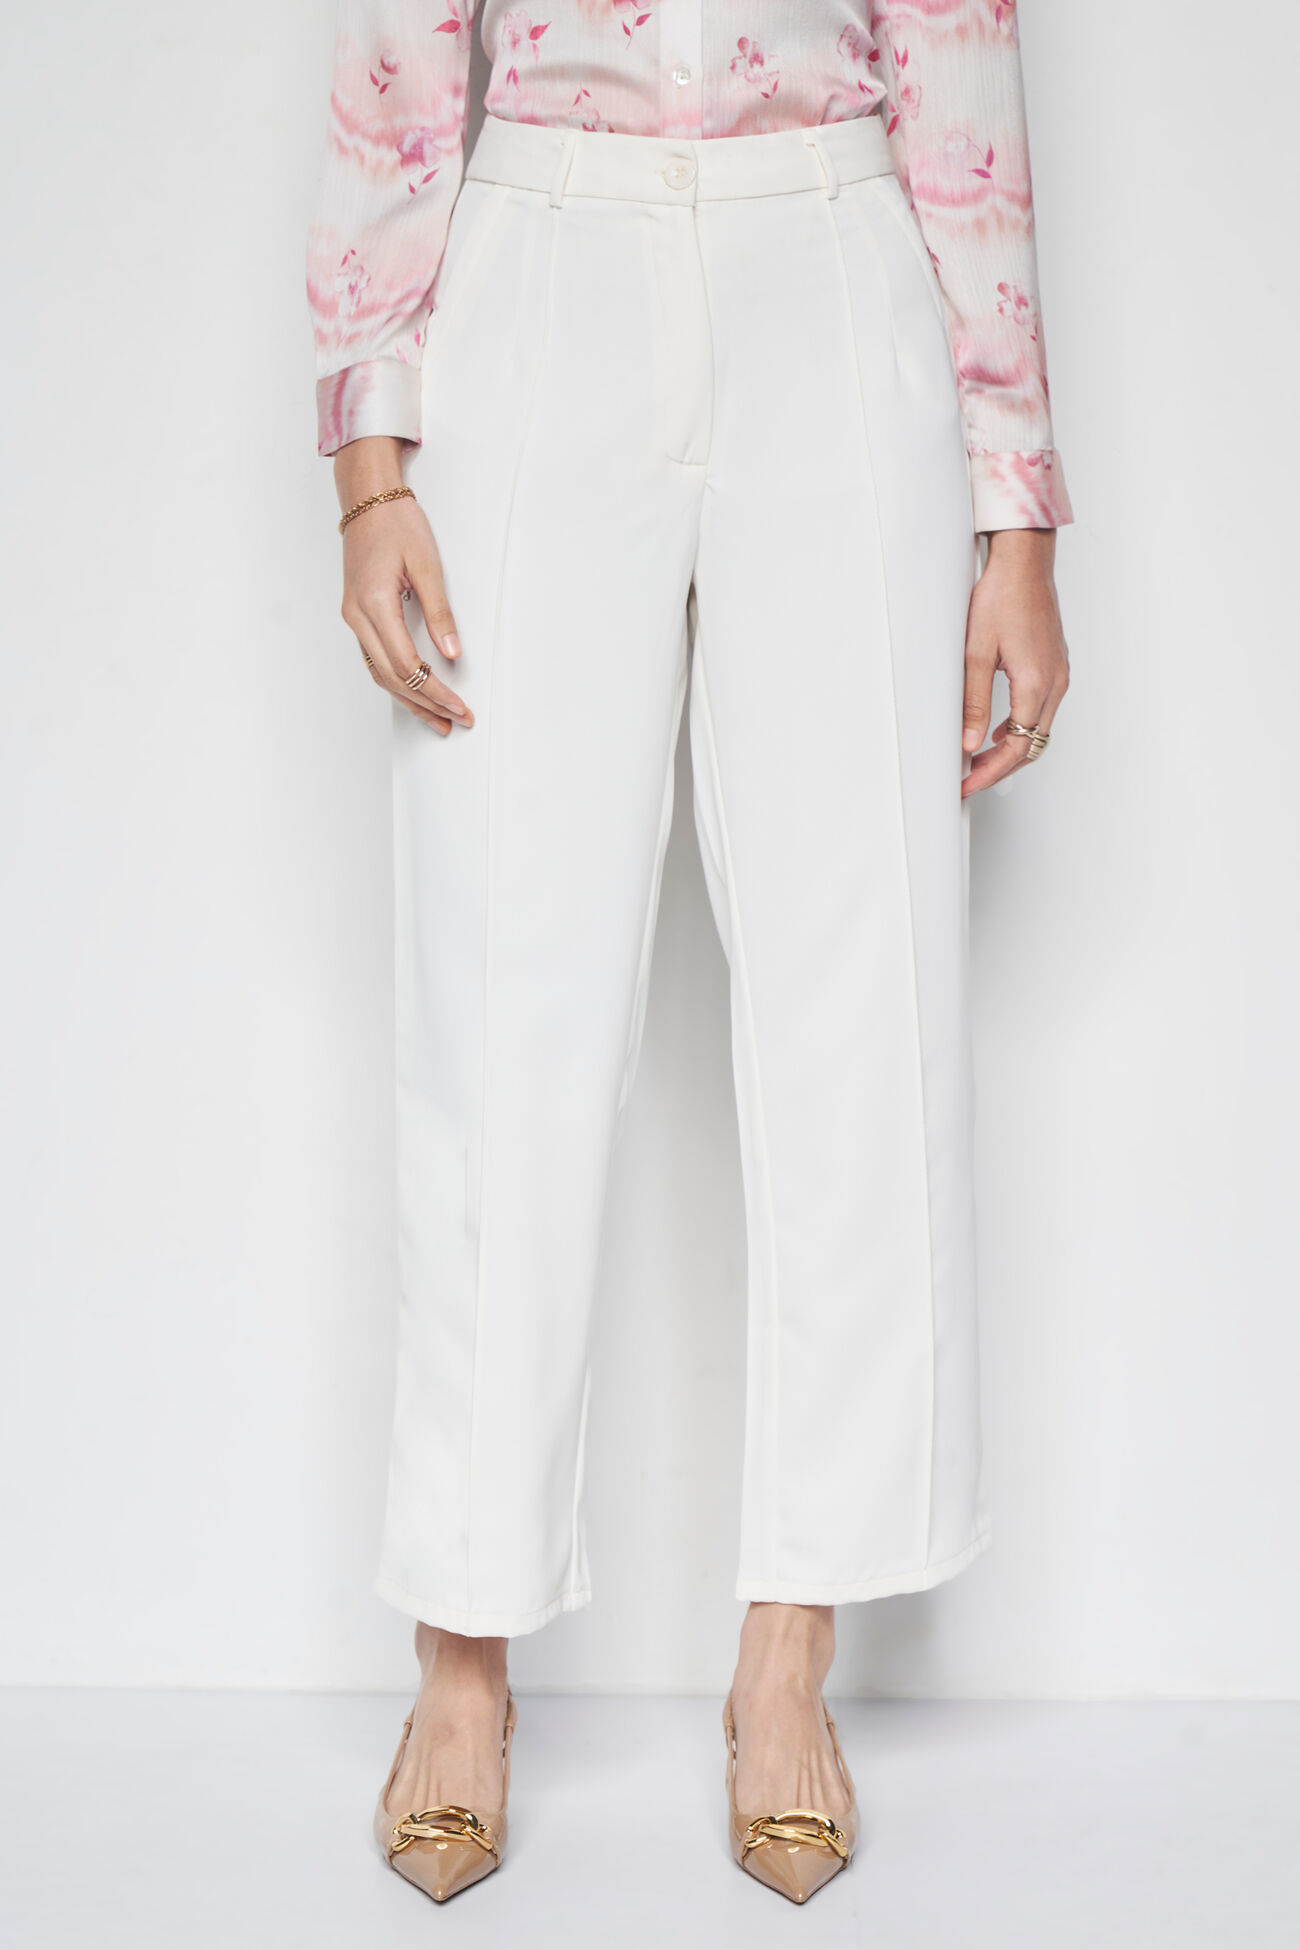 AM-to-PM Pant, Ivory, image 2